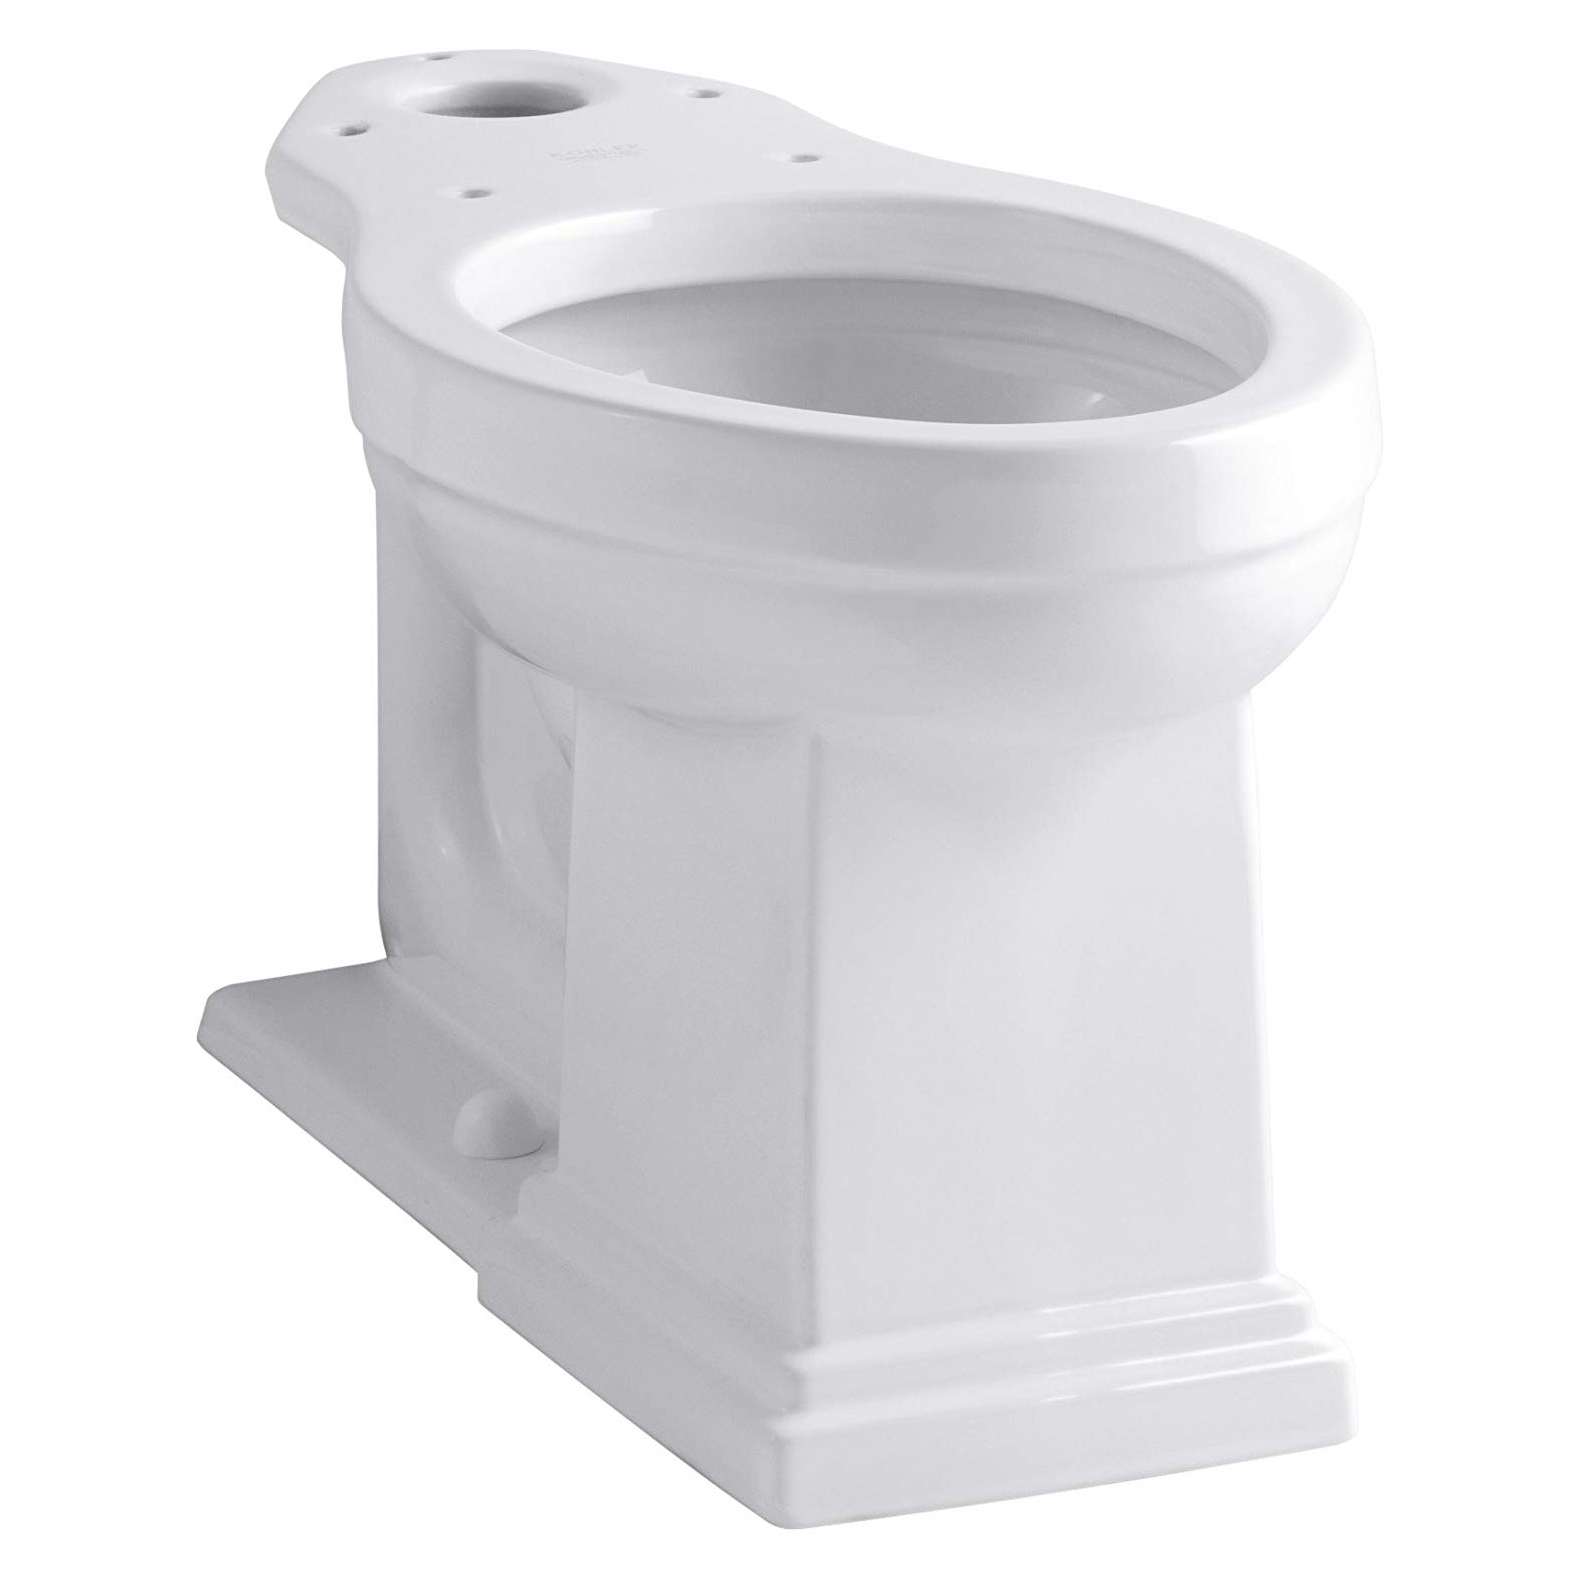 Tresham Comfort Height Elongated Toilet Bowl Only in White **SEAT NOT INCLUDED**